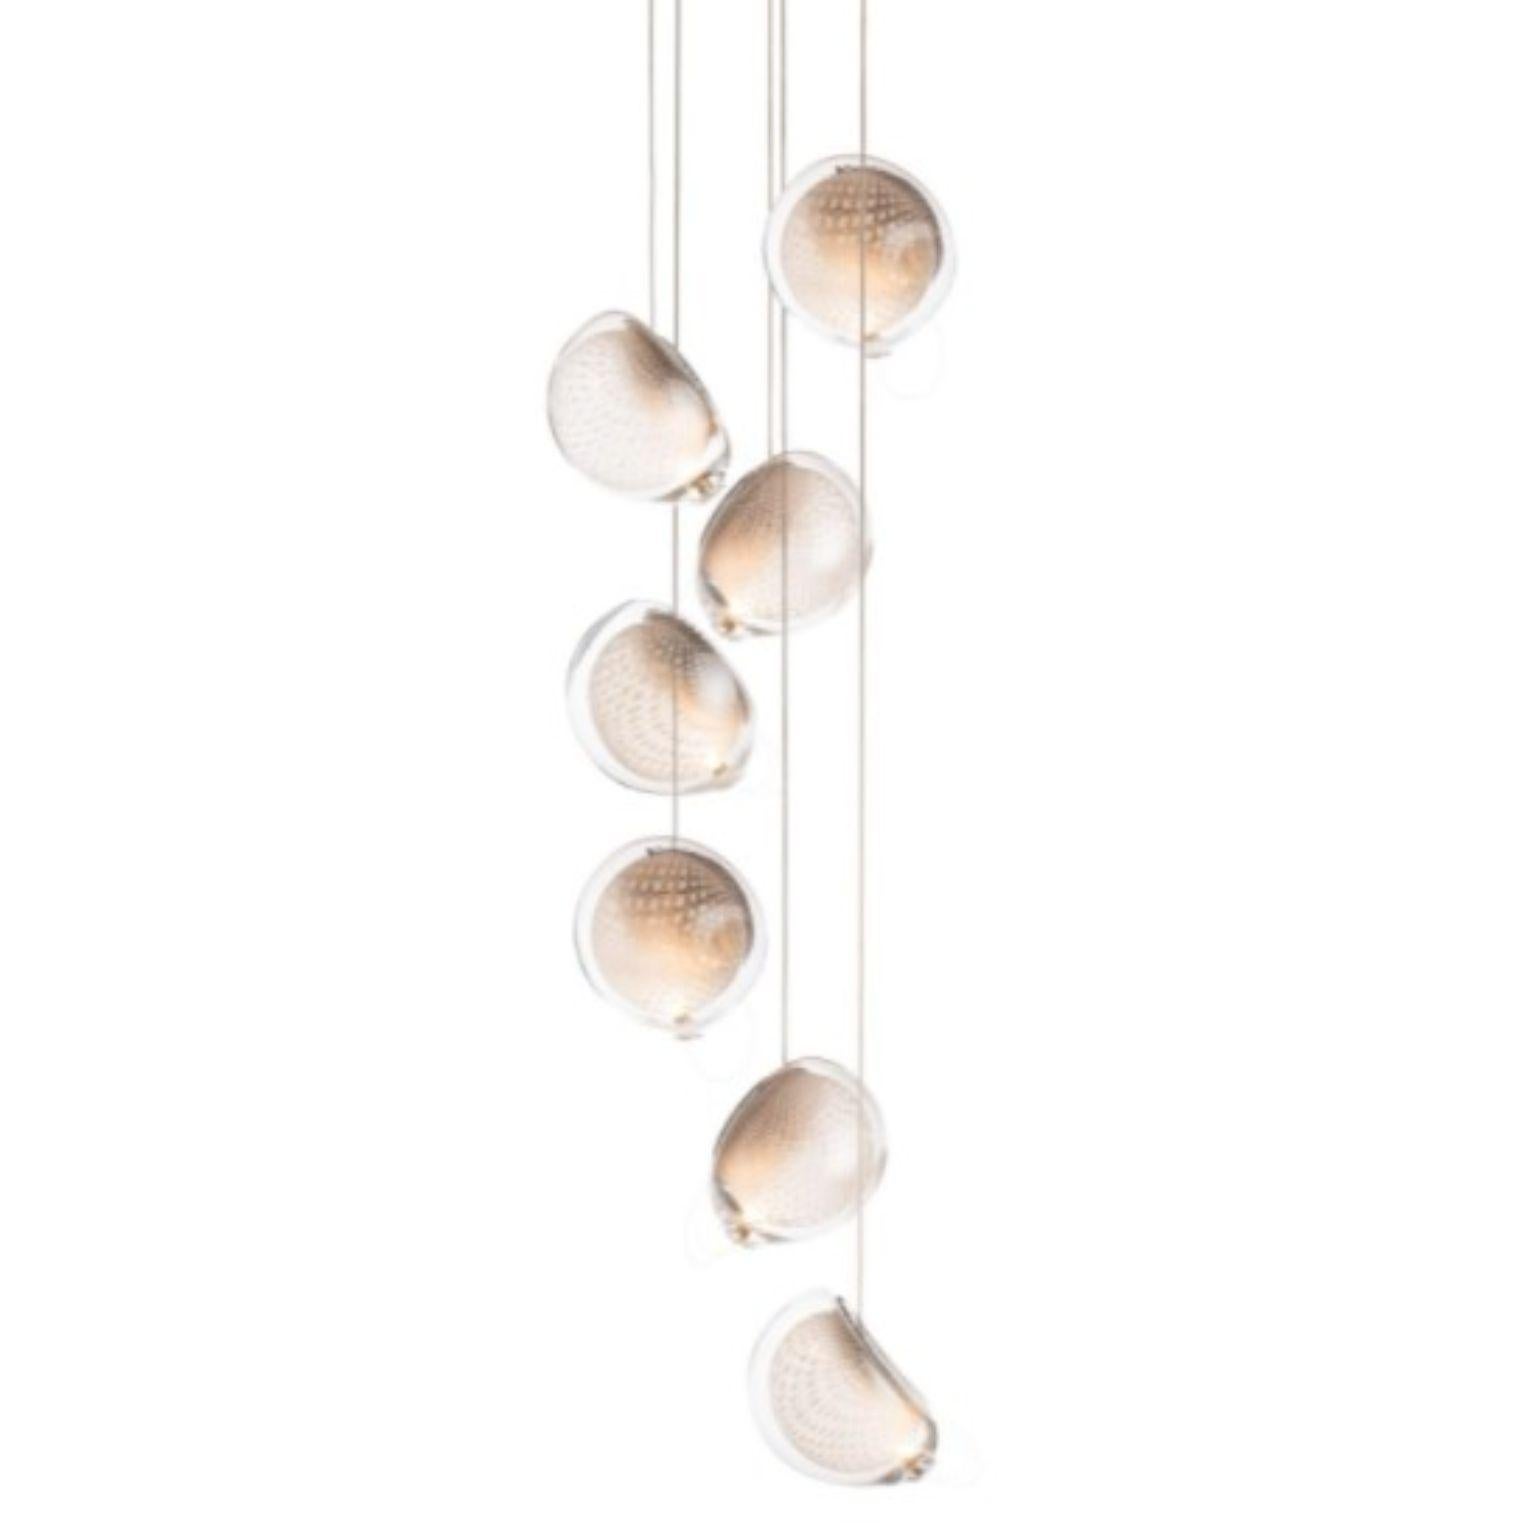 76.7 pendant by Bocci
Dimensions: D 20.3 x H 300 cm
Materials: brushed nickel round canopy
Weight: 4.8 kg
Also available in different dimensions.
All our lamps can be wired according to each country. If sold to the USA it will be wired for the